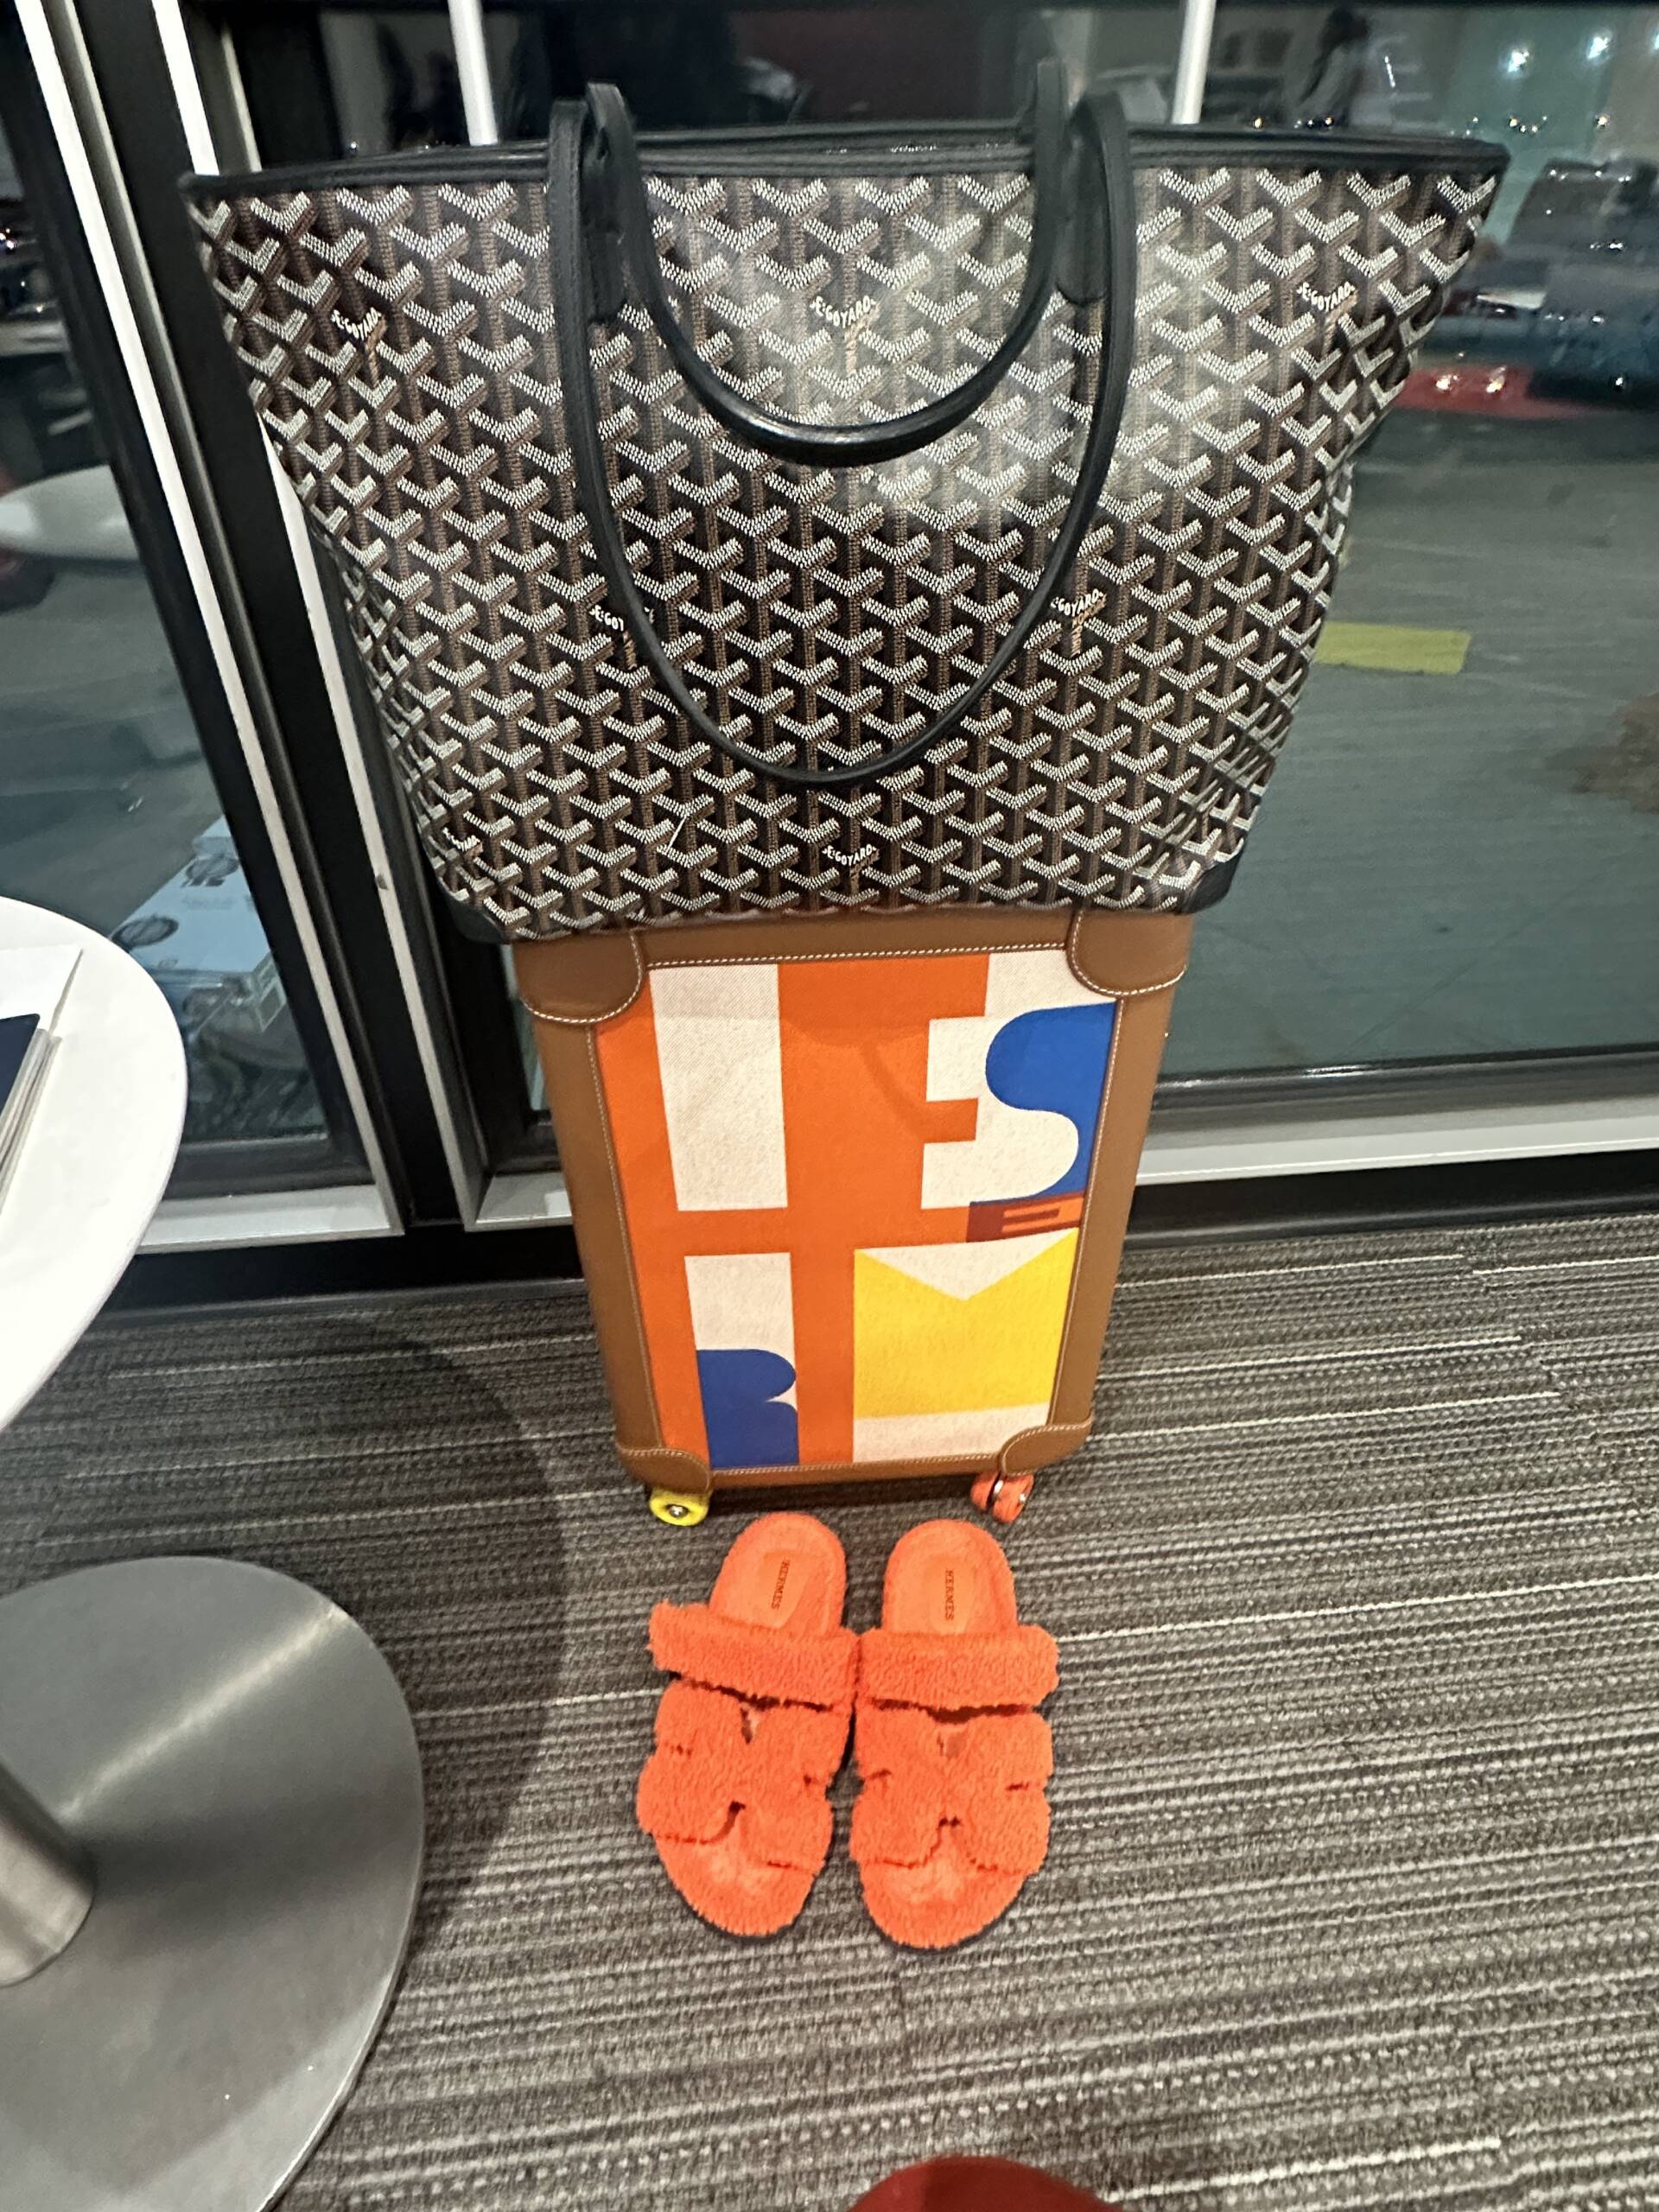 Goyard Artois tote to secure my contents as it's a fully zippered tote. Hermes luggage Chypre sandals